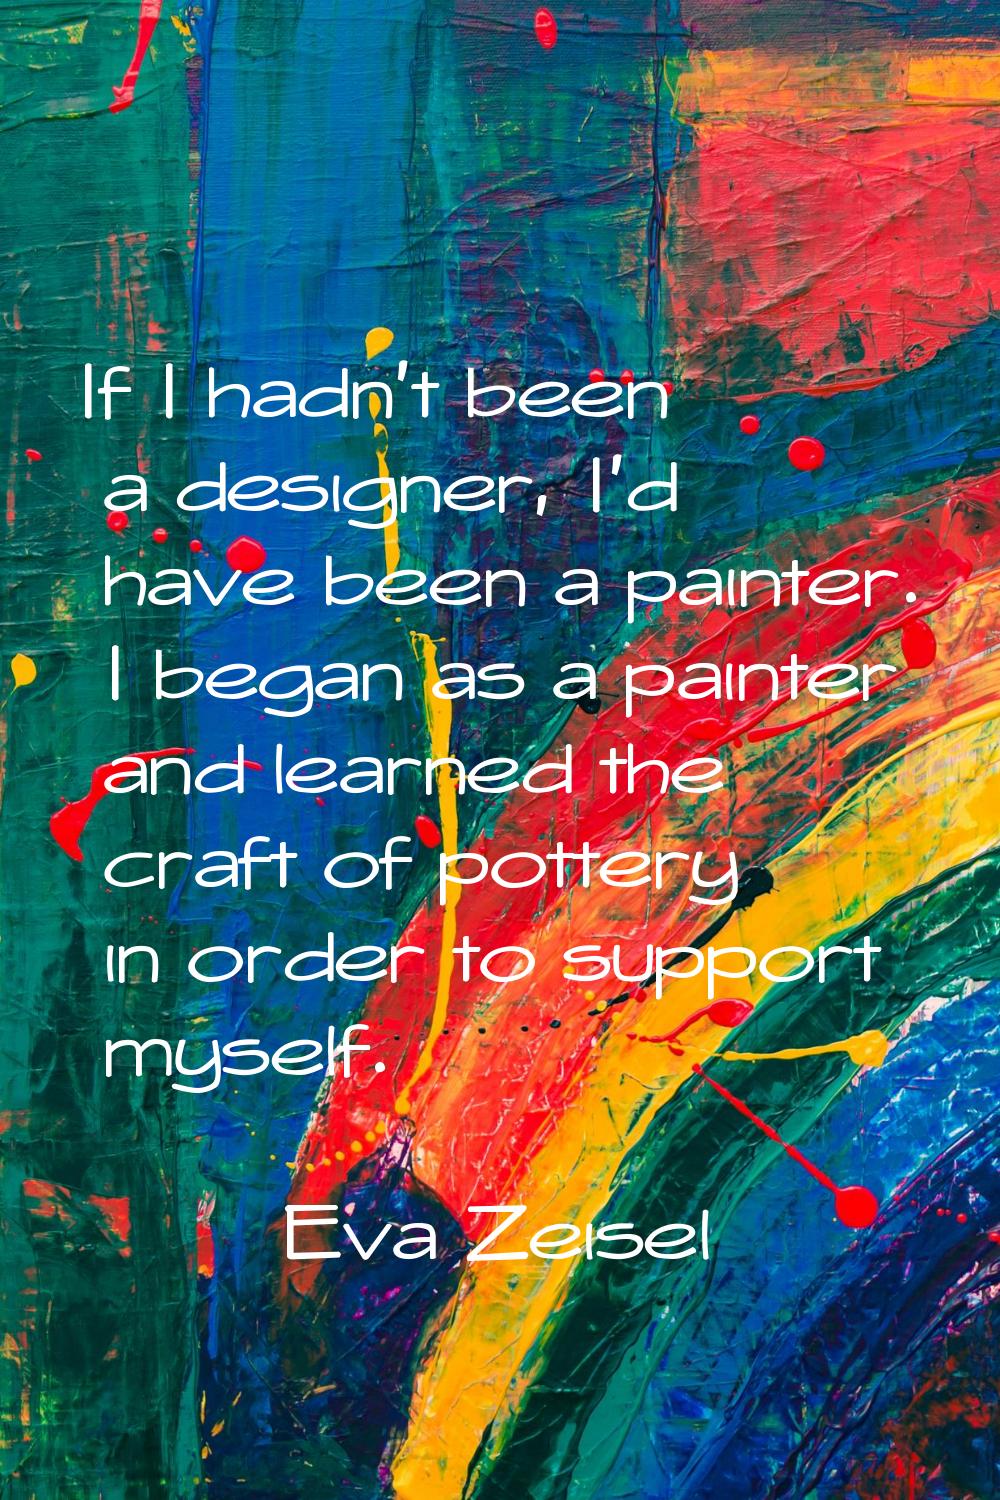 If I hadn't been a designer, I'd have been a painter. I began as a painter and learned the craft of